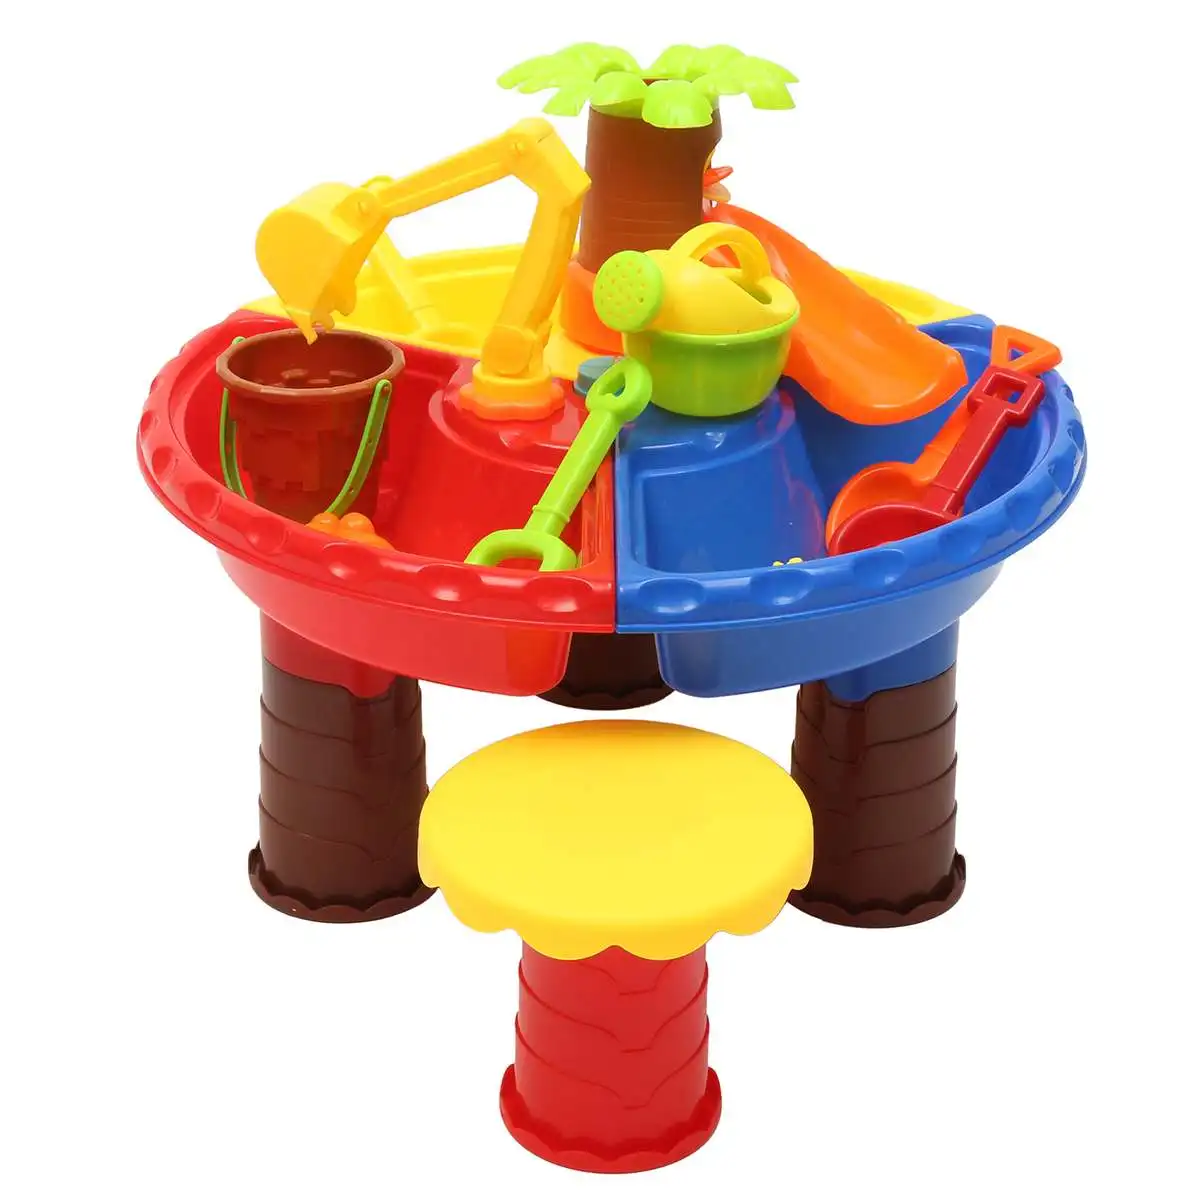 

Children Sand Pit Play Toy Kit Water Activity Table Stool Kids Outdoor Beach Sandpit Bucket Shovel Digger Tool Game Toy Fun